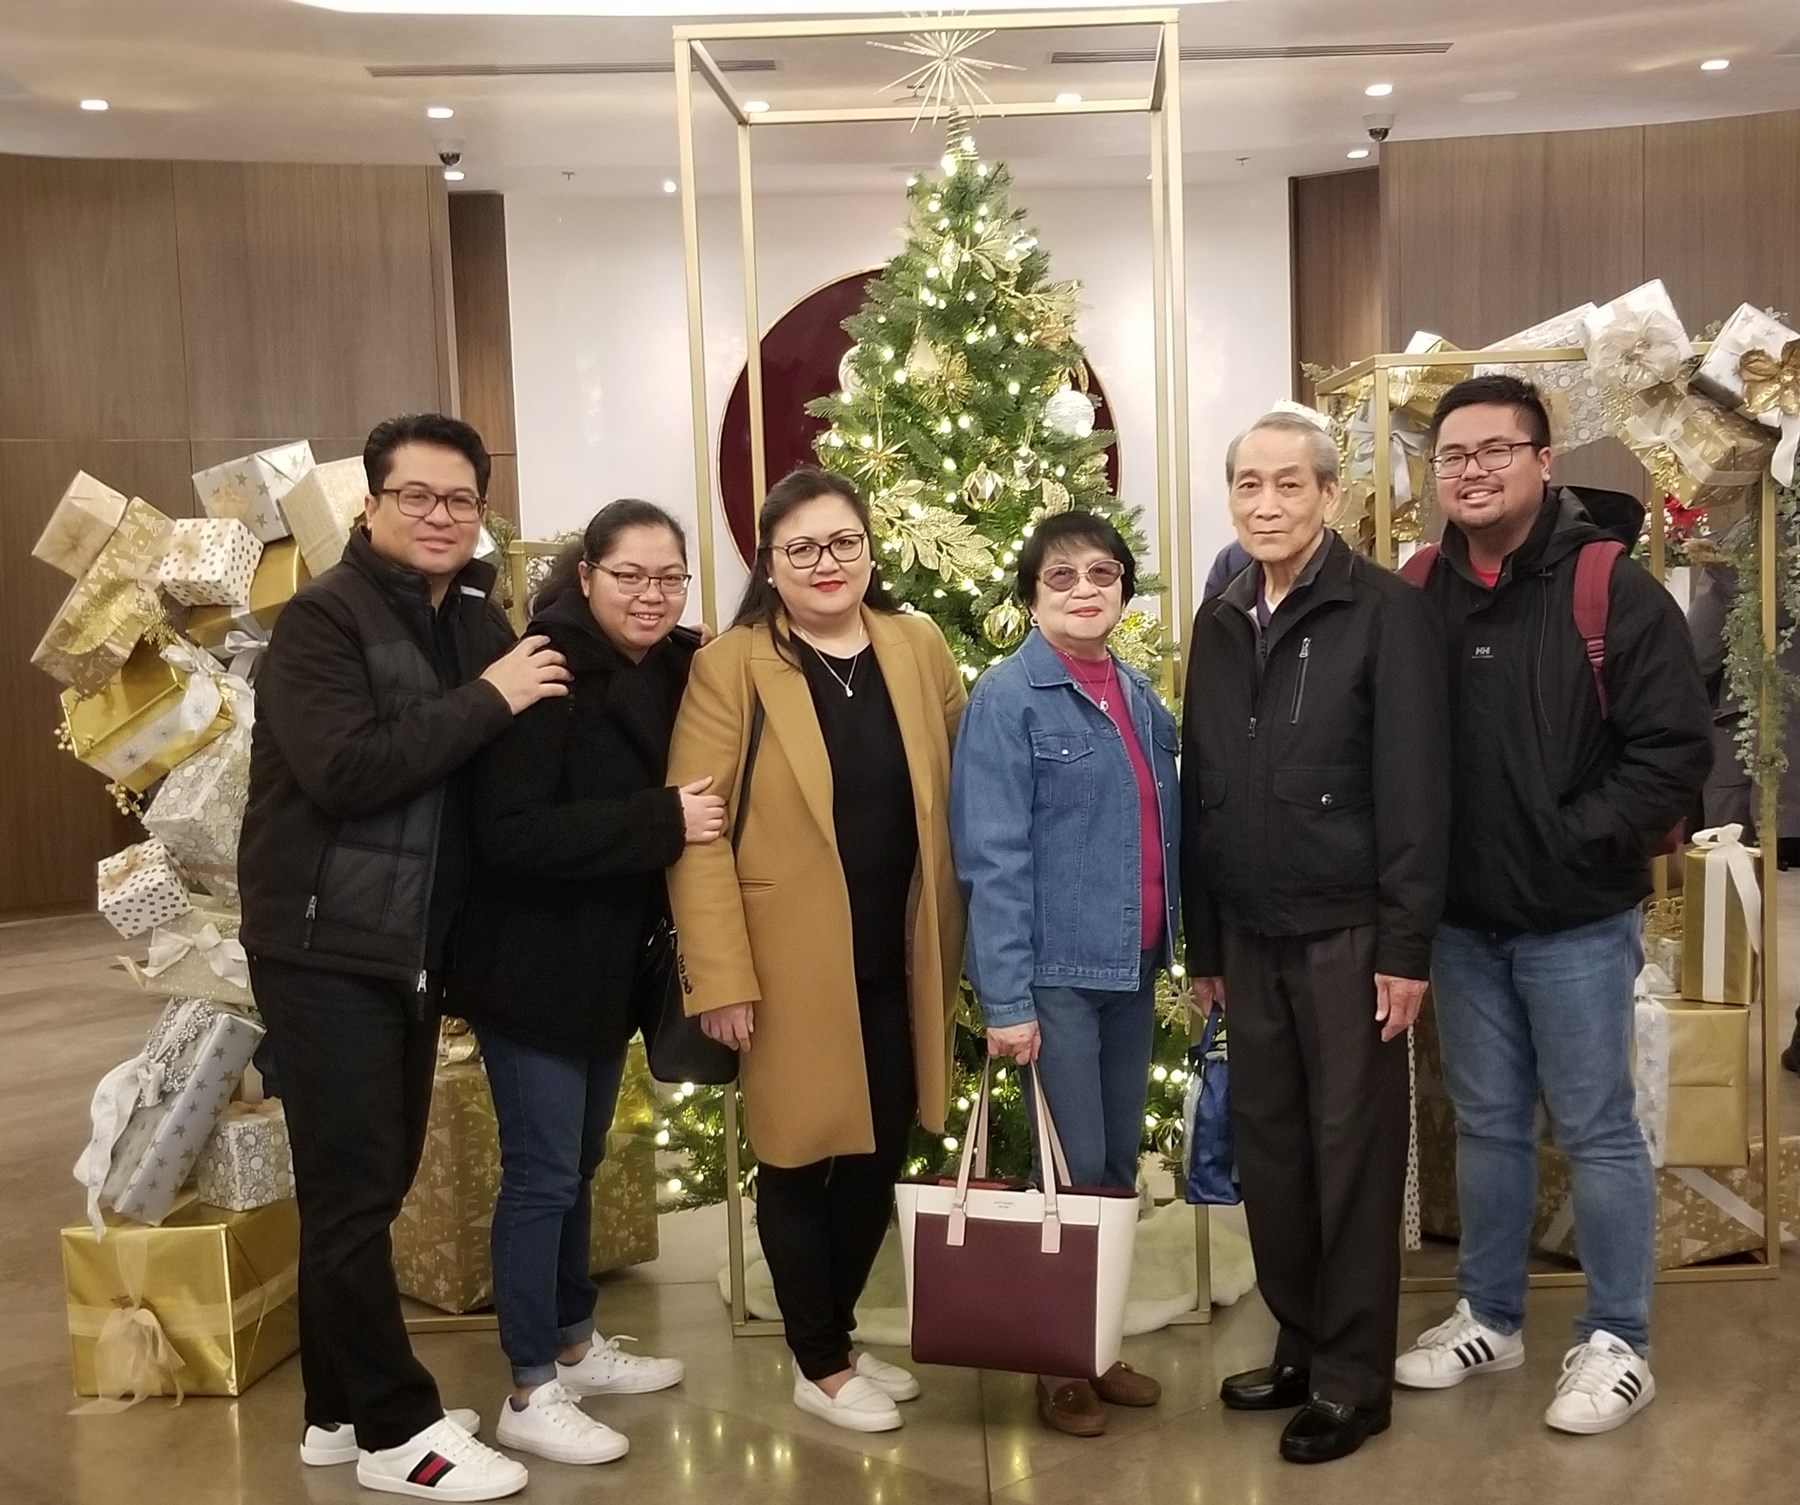 Staycation at JW Marriott Parq Vancouver (December 2019) with Aldrin, Monette, Mommy Flor, Daddy Tony & Jappy.